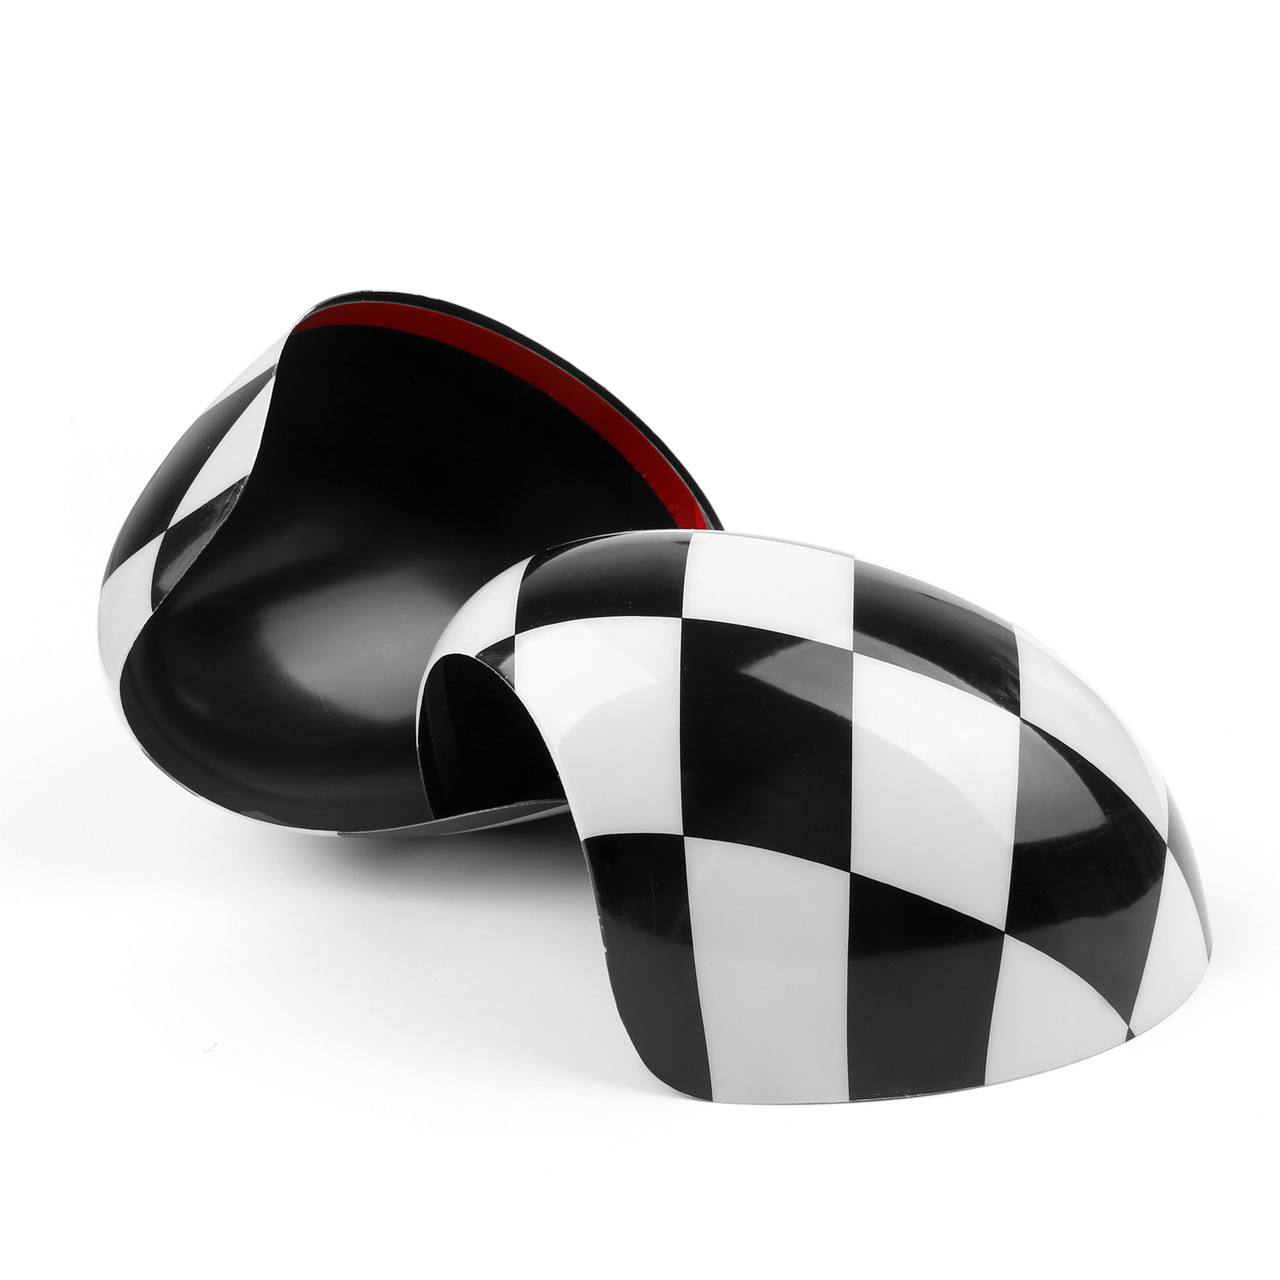 2 x Checkered WING Mirror Covers Fit for MINI Cooper R55 R56 R57 Power Fold Mirror